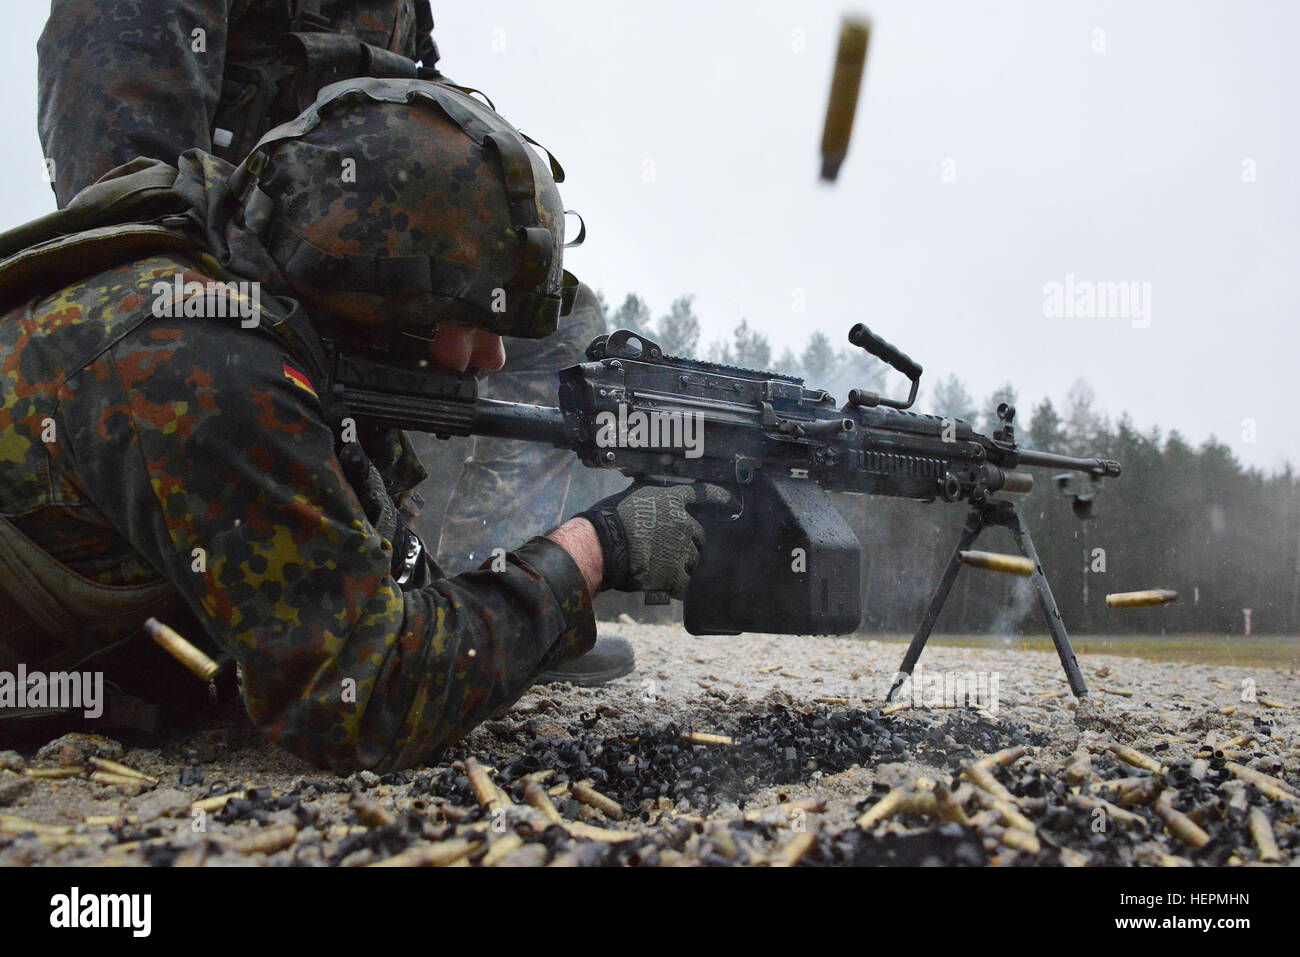 A German soldier fires a M249 light machine gun during a familiarization training on U.S. weapons at the 7th Army Joint Multinational Training Command Grafenwoehr Training Area, Germany, Dec. 9, 2015. (U.S. Army photo by Visual Information Specialist Gertrud Zach/released) CATC trains German soldiers on US weapons 151209-A-HE539-0205 Stock Photo